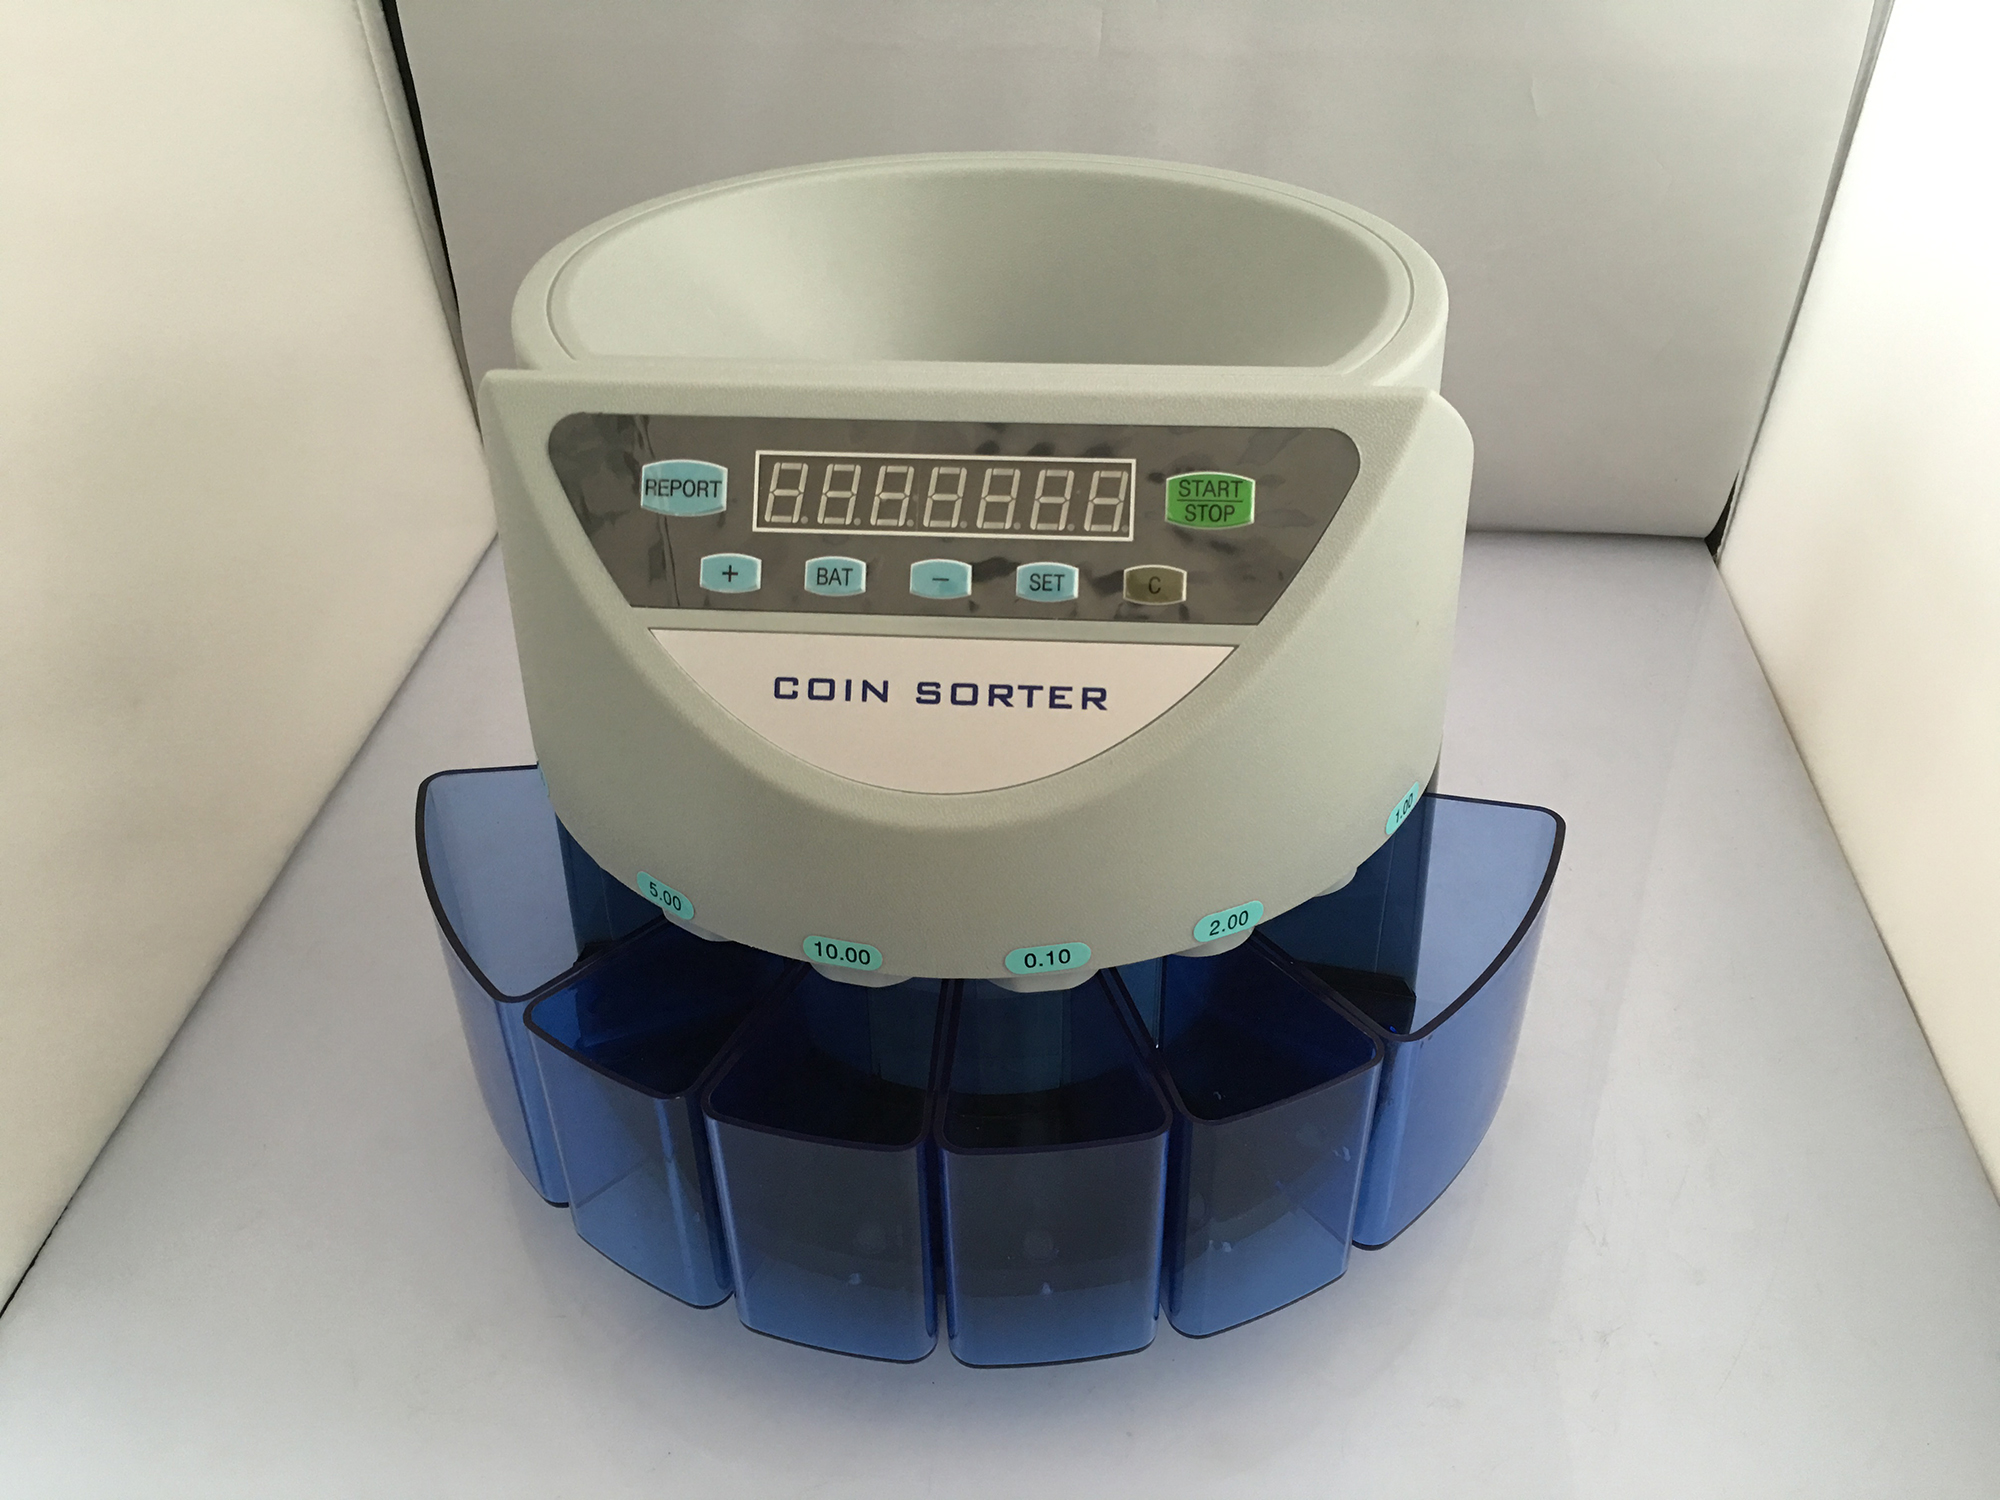 Electronic coin sorter SE-900 coin counting machine for most of countries